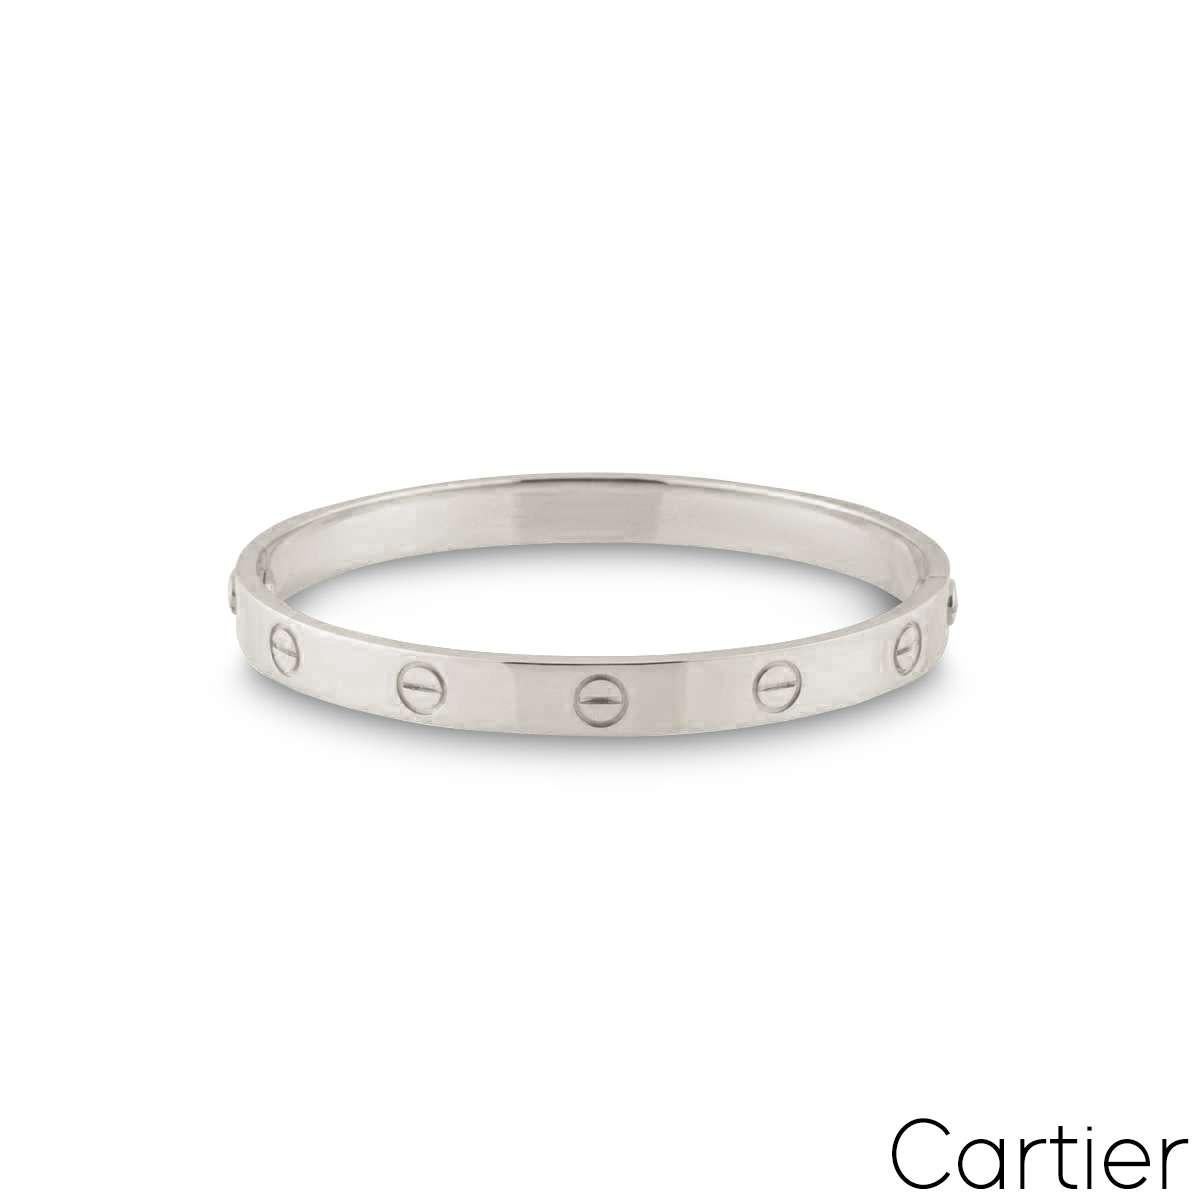 An 18k white gold Cartier bracelet from the Love collection. The bracelet comprises of the iconic Cartier screw motif design on the outer edge. A size 20, featuring the old style screw fitting, this bracelet has a gross weight of 38.17 grams.

The